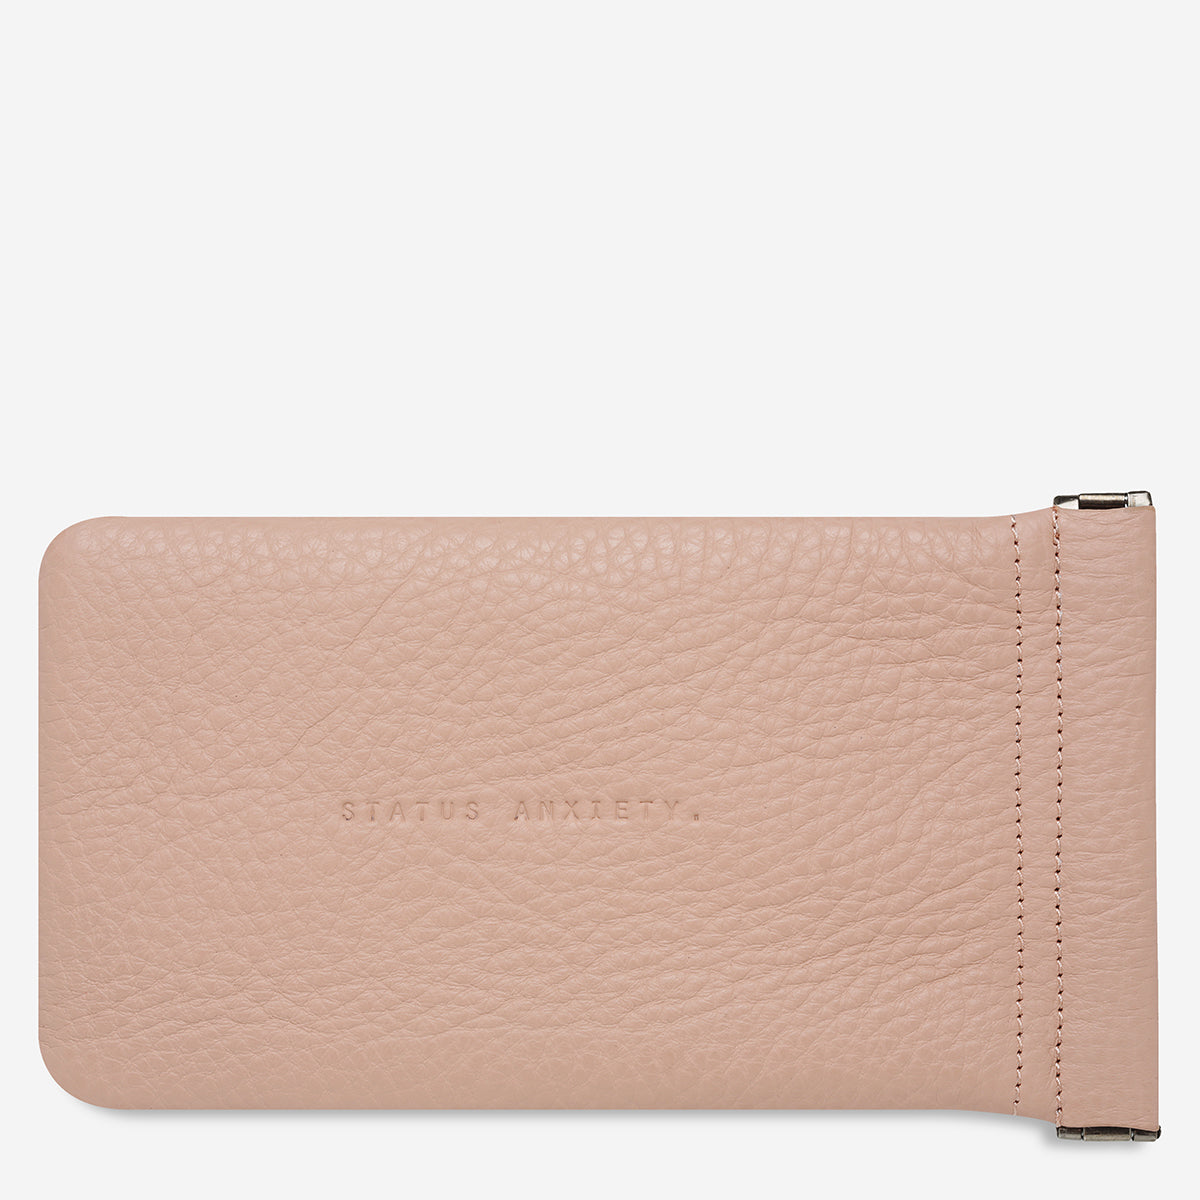 Status Anxiety Keepsake Leather Pouch Dusty Pink